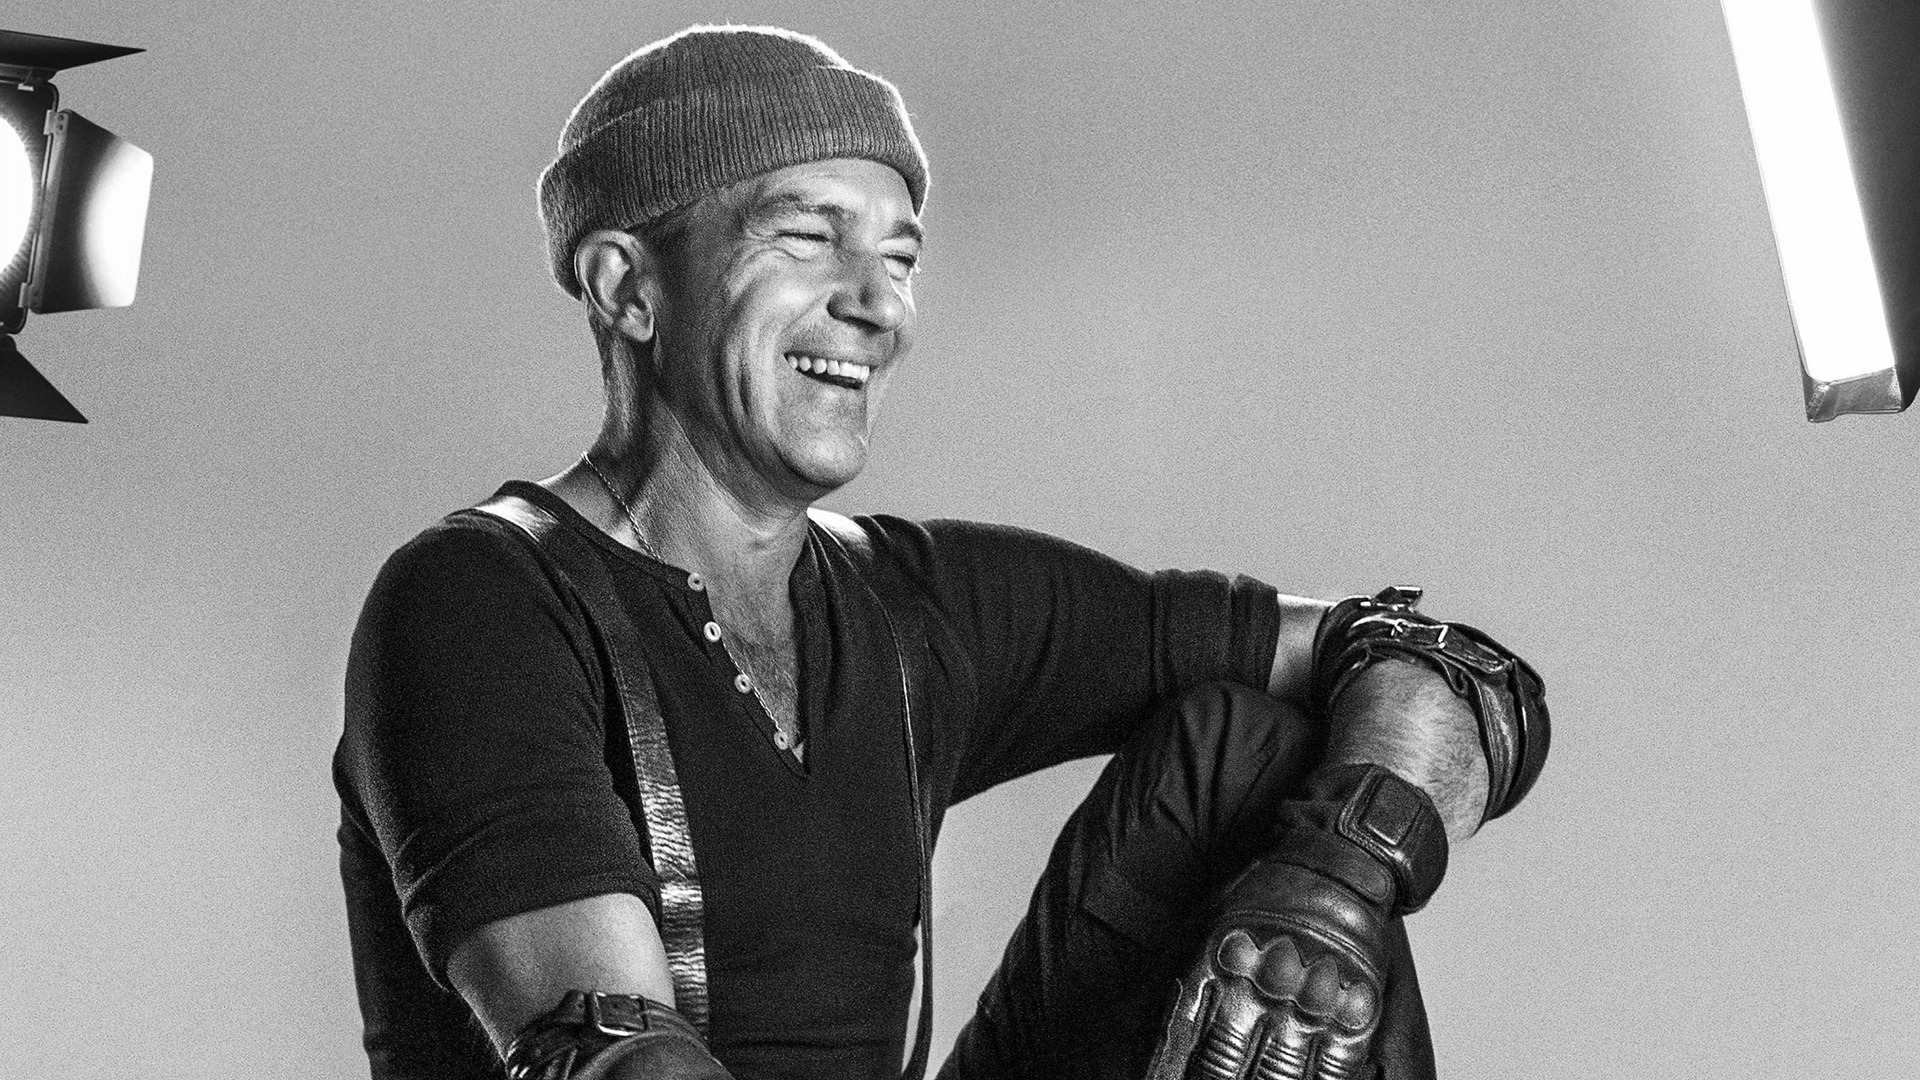 Antonio Banderas The Expendables 3 for 1920 x 1080 HDTV 1080p resolution